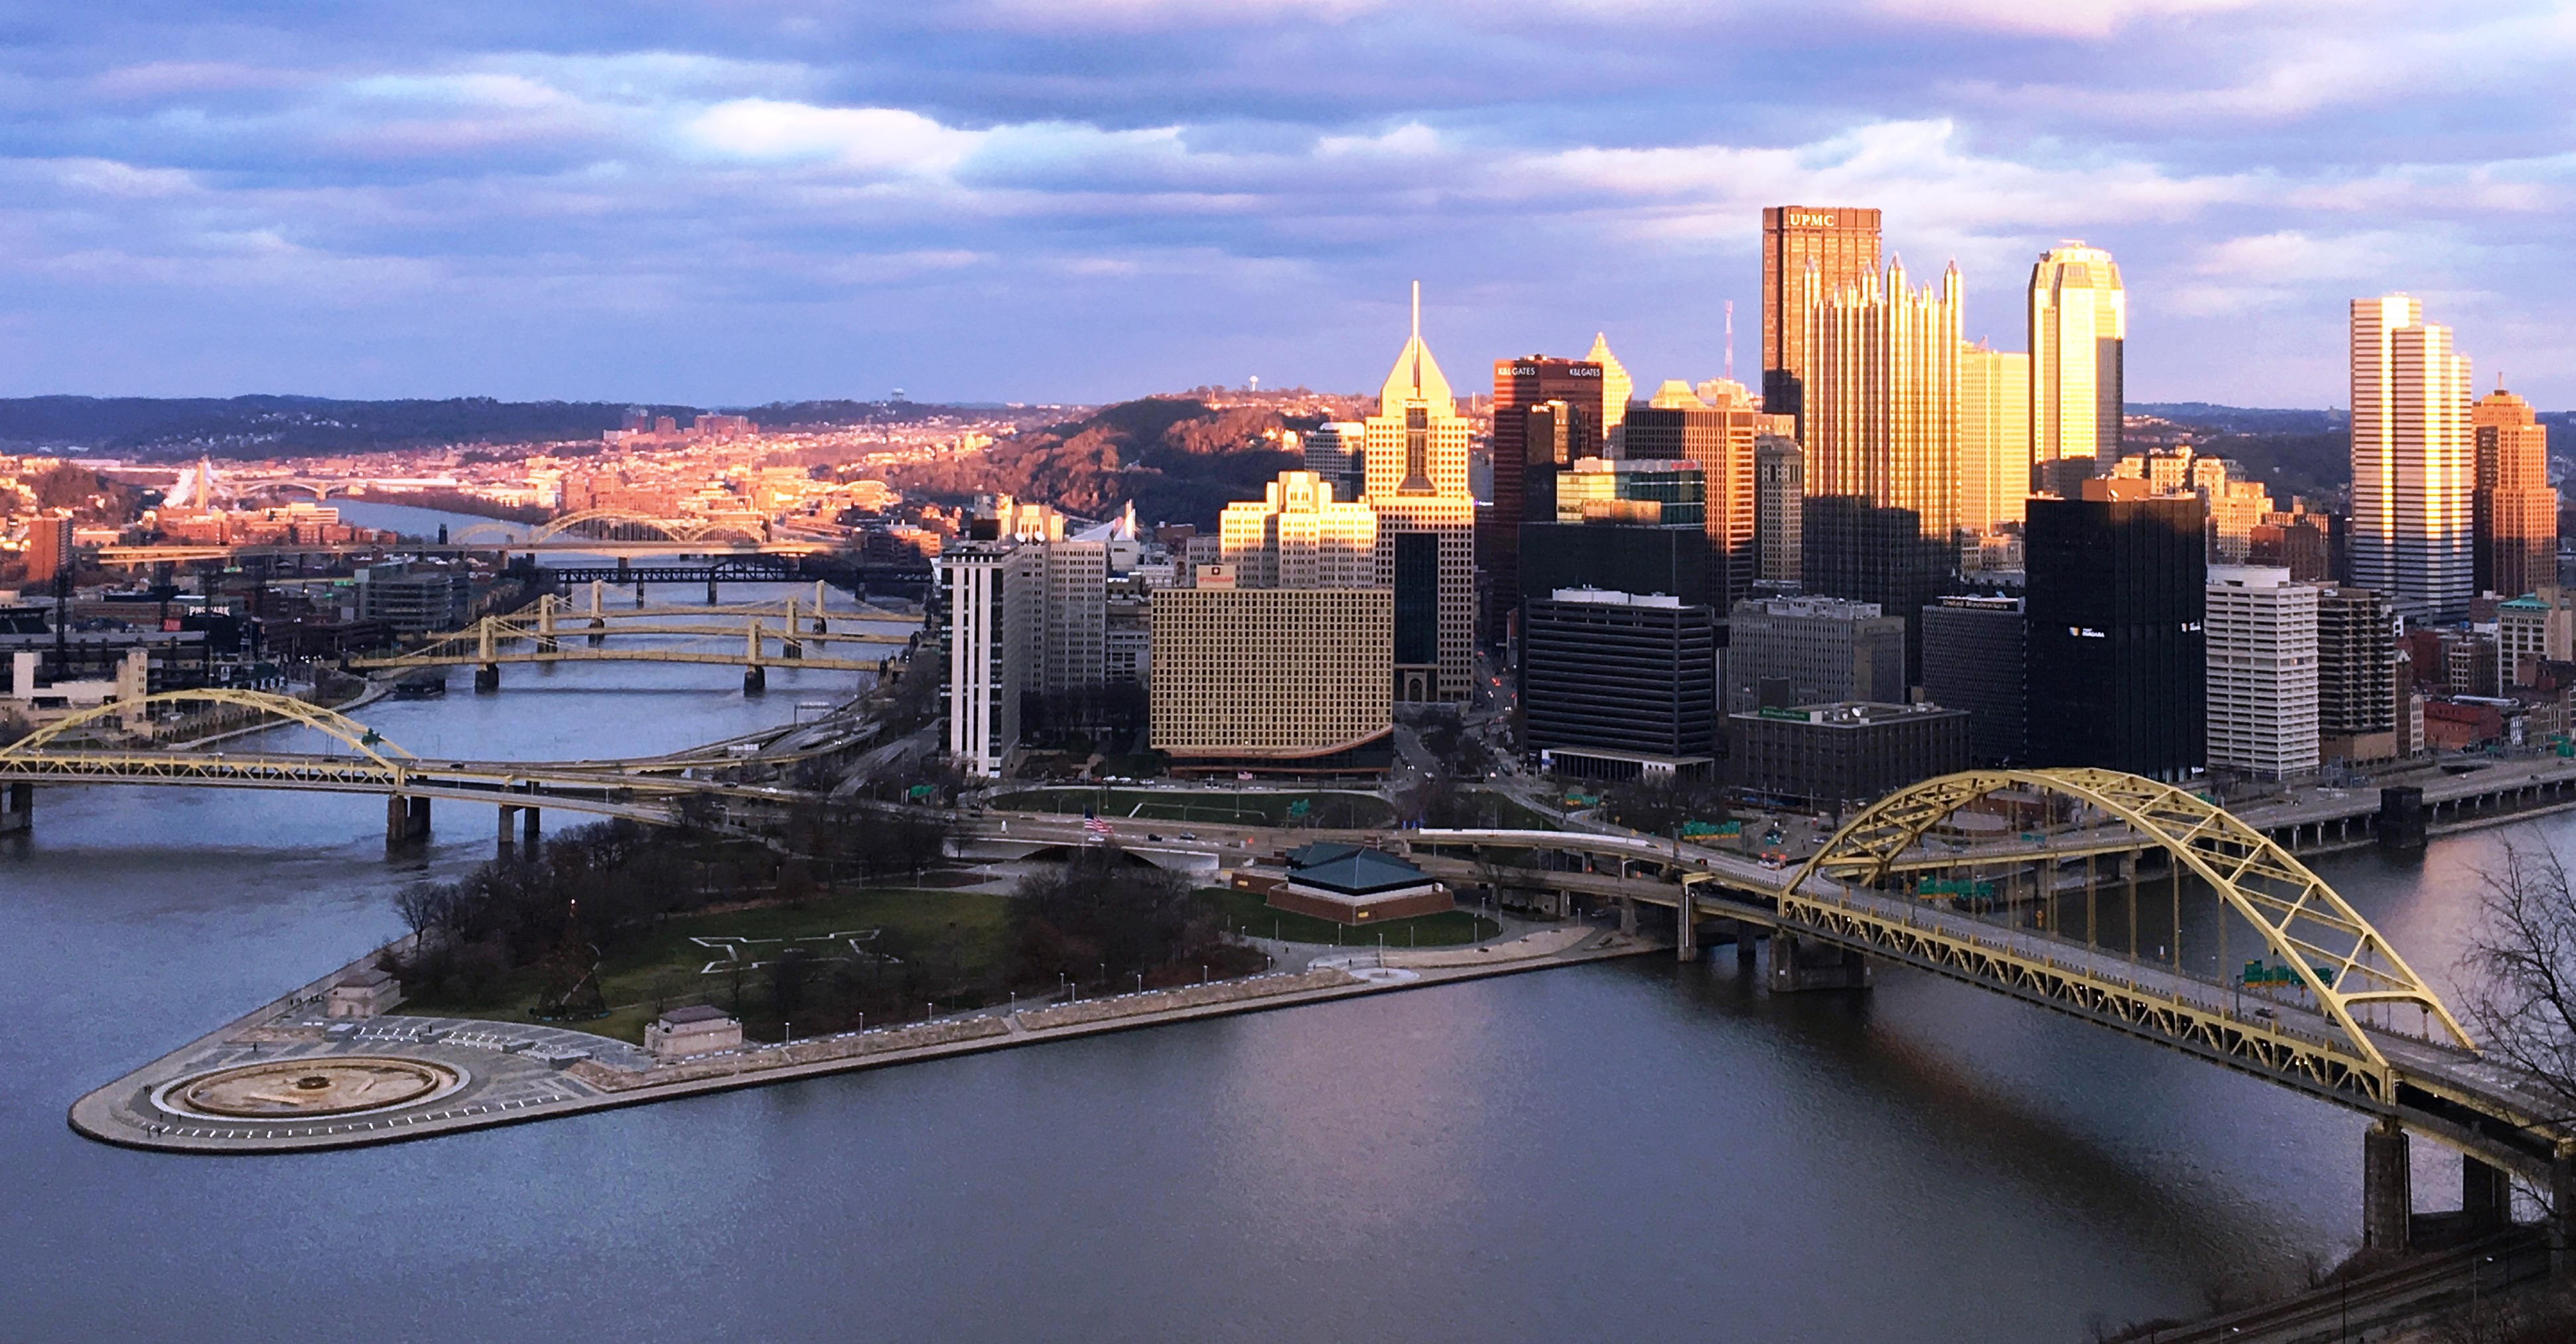 A Pennsylvania Native Spends His First Day in Pittsburgh After 36 Years